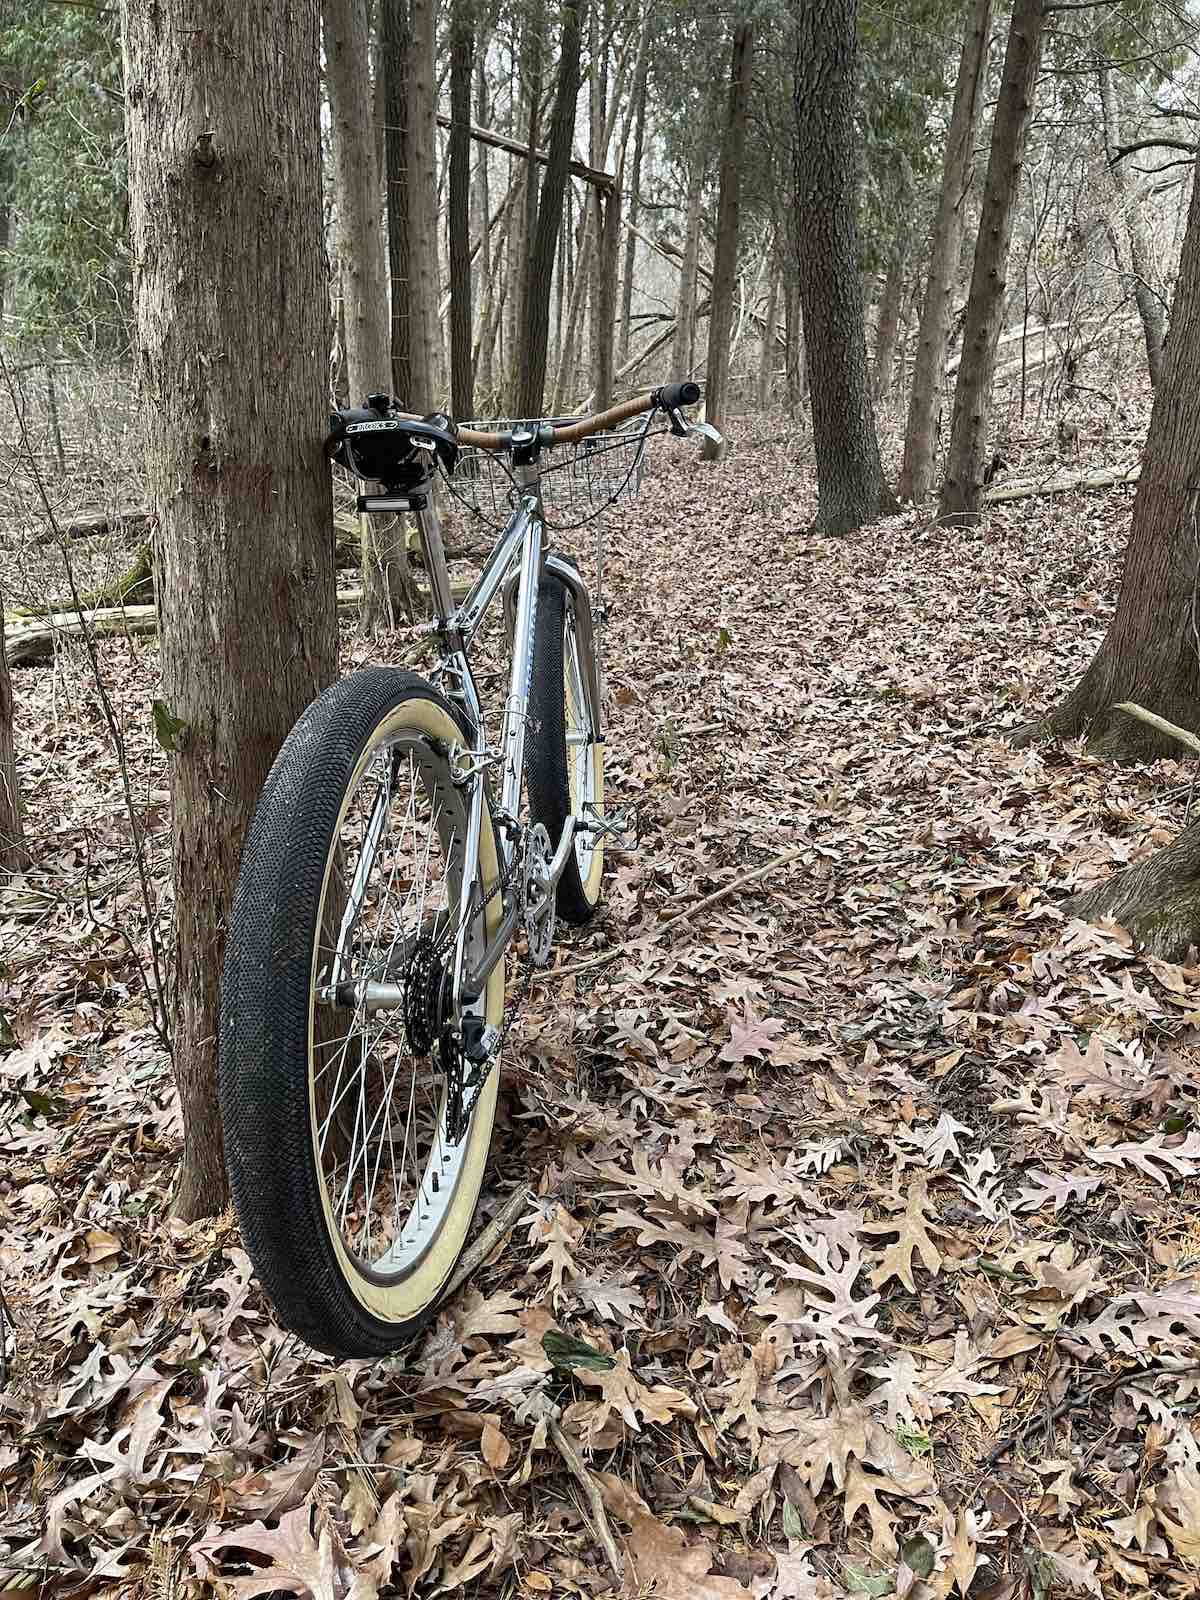 bikerumor pic of the day a bicycle leans against a small tree trunk on a trail covered in dead leaves.